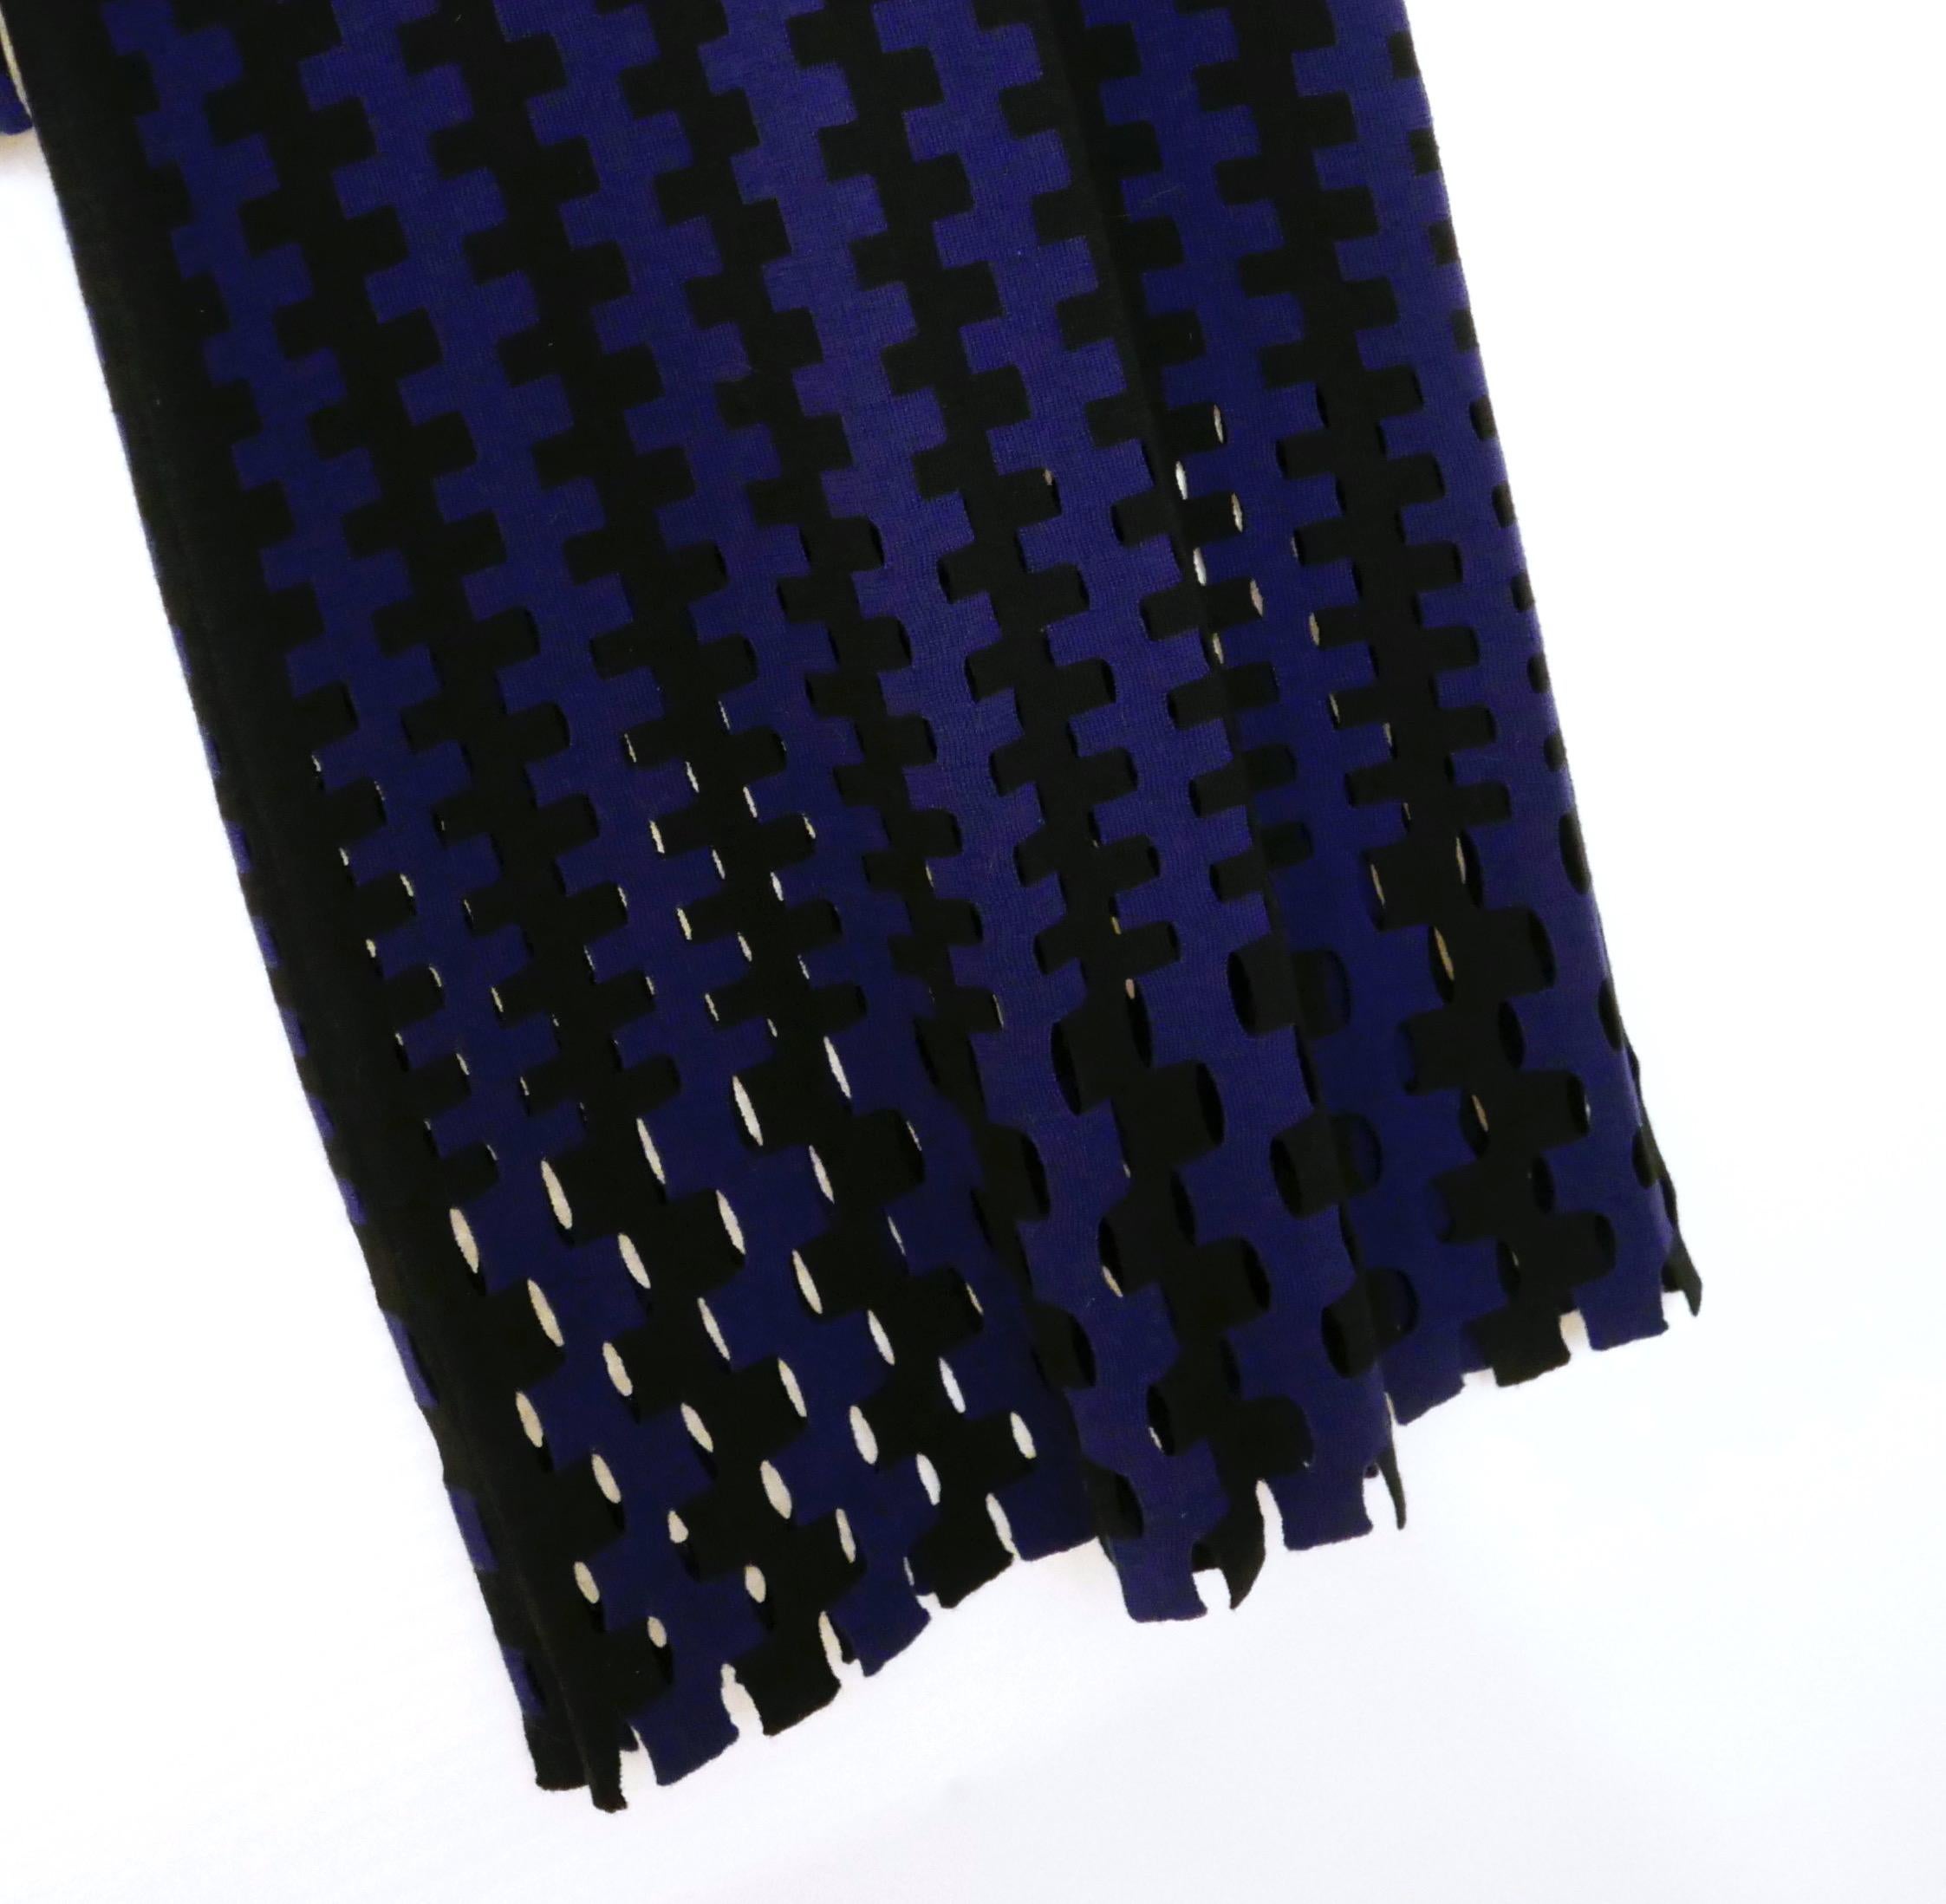 Comfy and slinky knit dress from Diane Von Furstenberg - bought for £495 and unworn.
Made from soft merino wool in a cobalt blue and black hounds-tooth inspired weave, It has
subtly sexy cutout panels to the hem and sleeves and high neck.
Size P